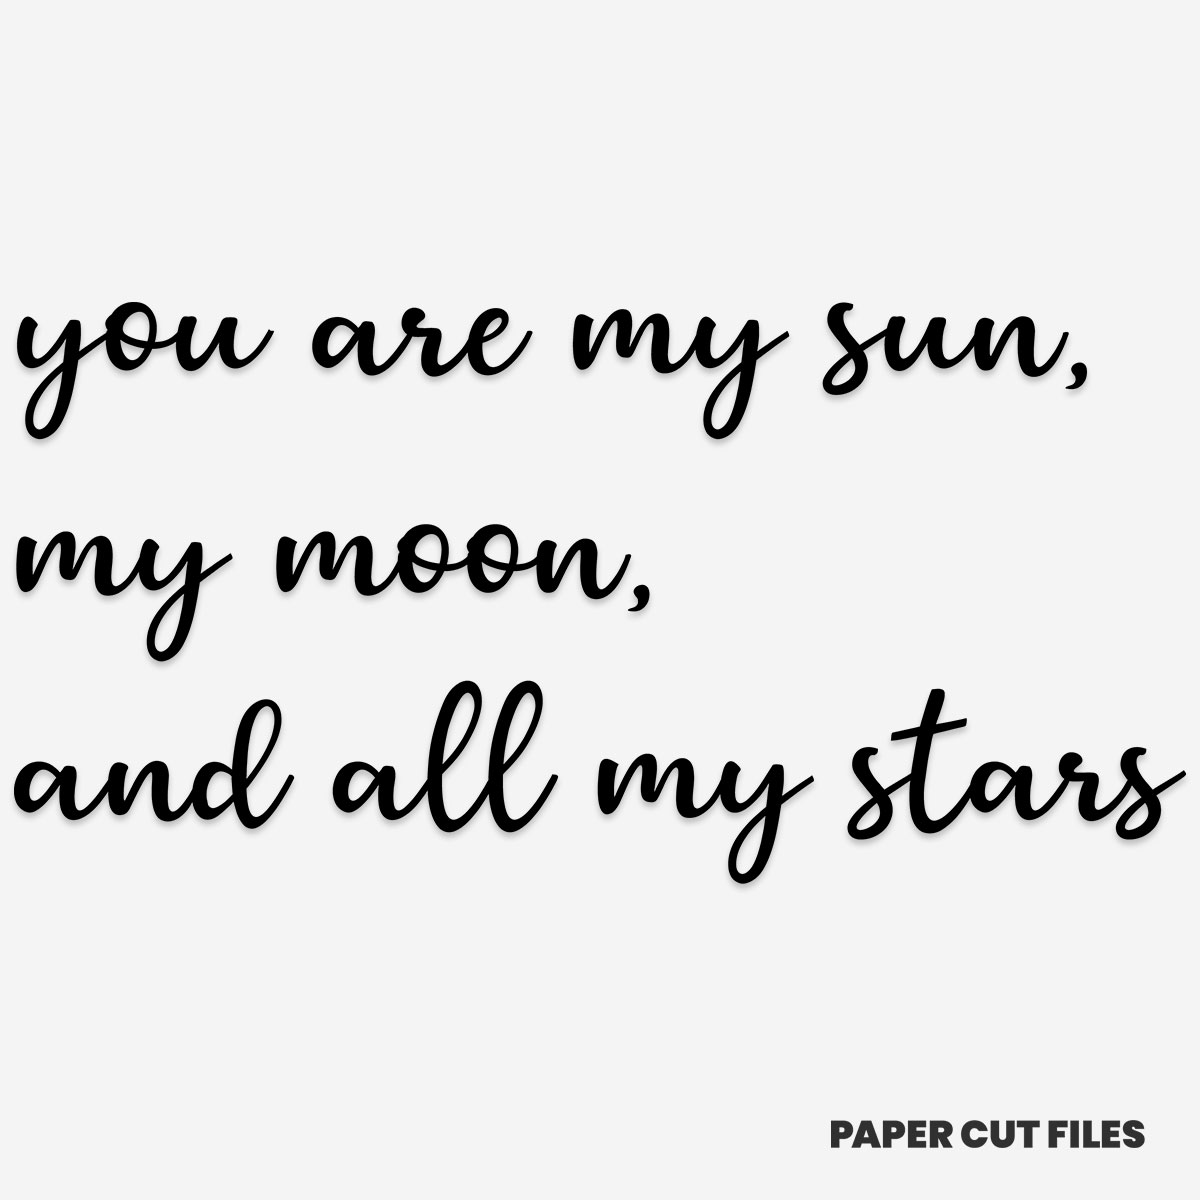 'You are my sun' quote - Free SVG & PNG PaperCut Files